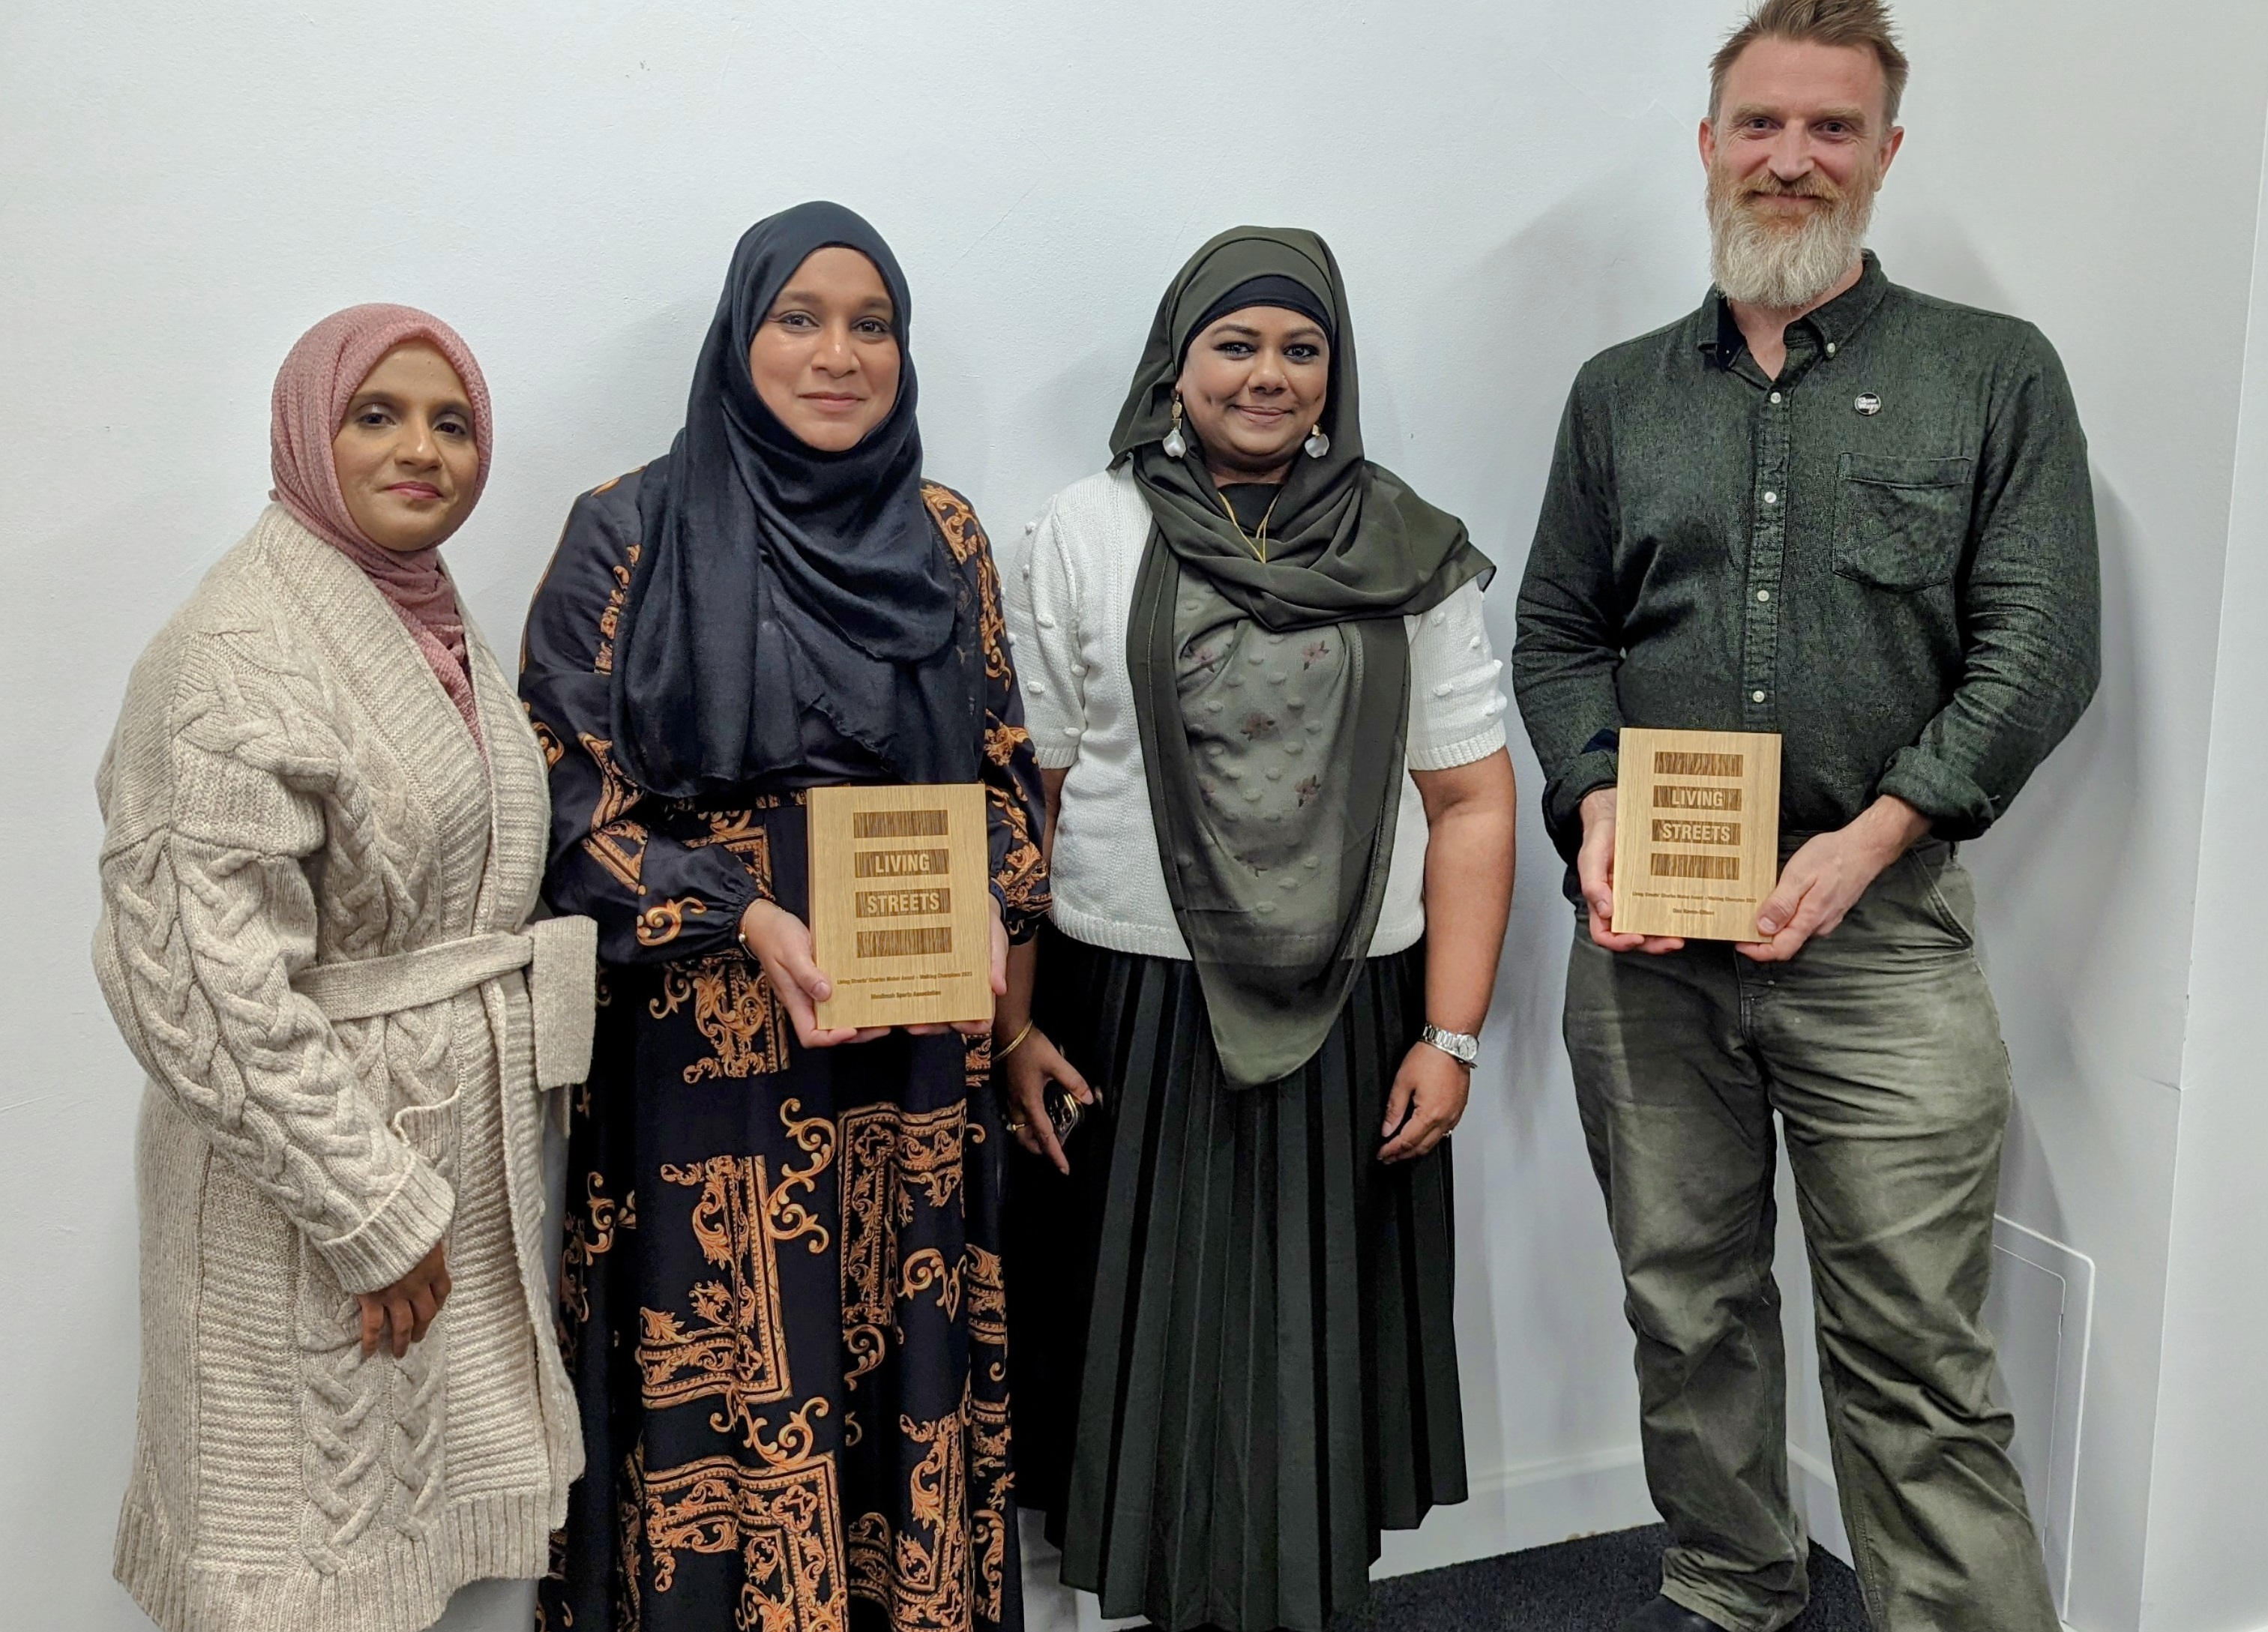 three women in hijabs are standing together, the woman in the middle is holding a wooden plaque. A man is standing on the right of the woman and is also holding a wooden plaque.